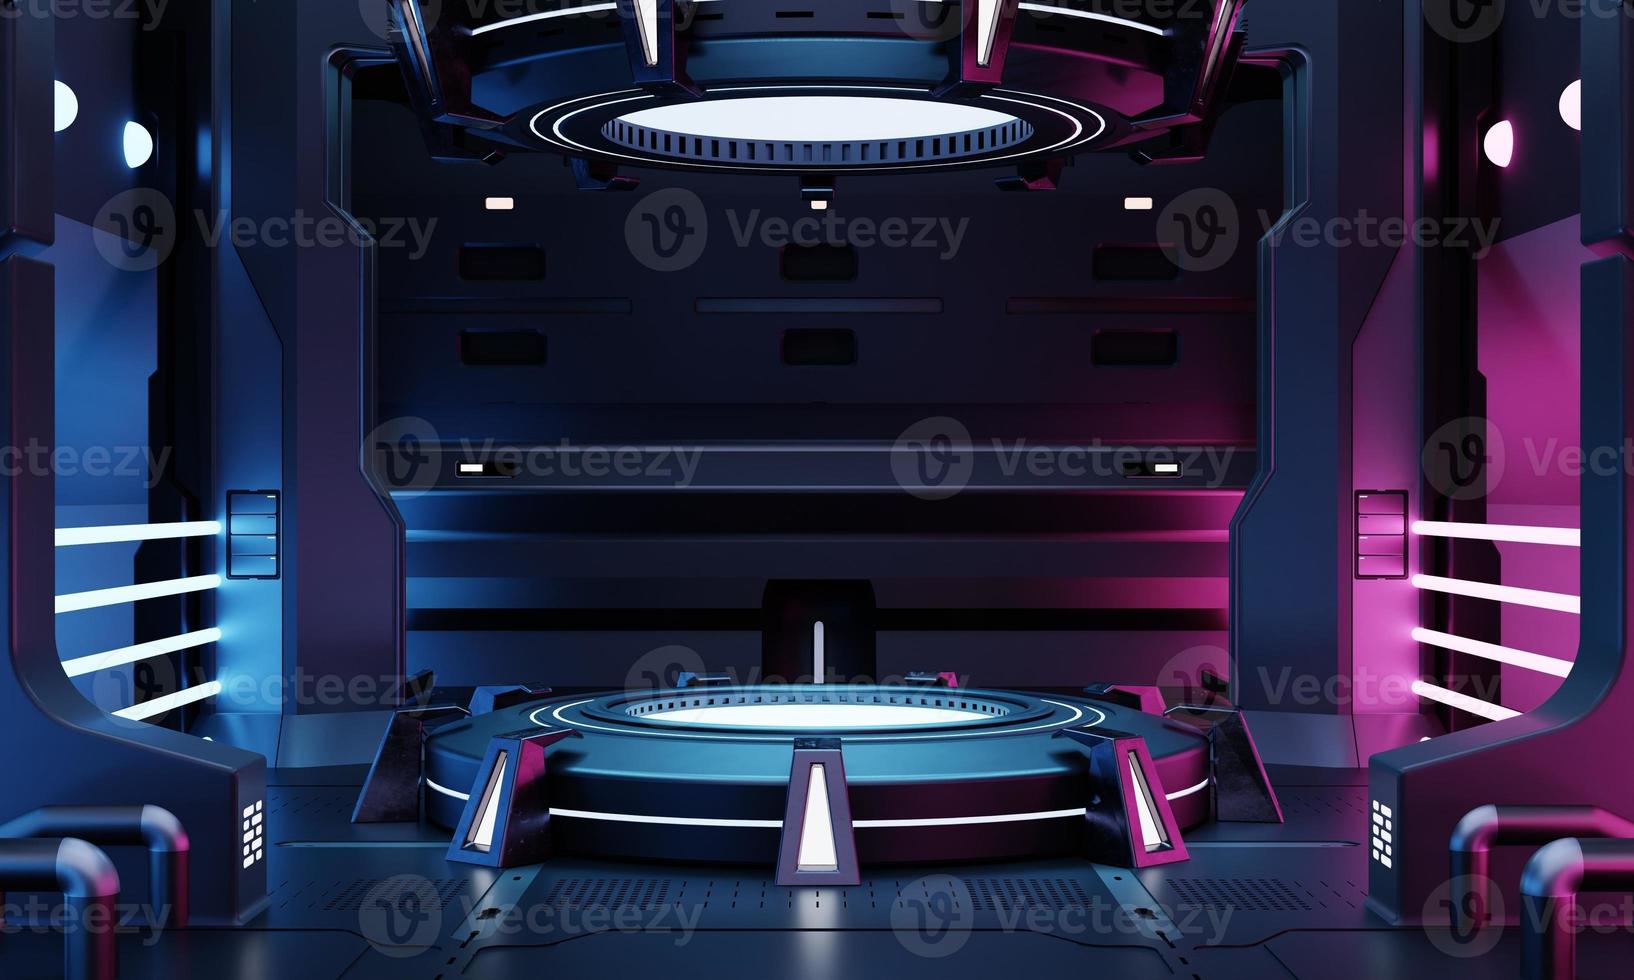 Cyberpunk sci-fi product podium showcase in empty spaceship room with blue and pink background. Cosmos space technology and entertainment object concept. 3D illustration rendering photo